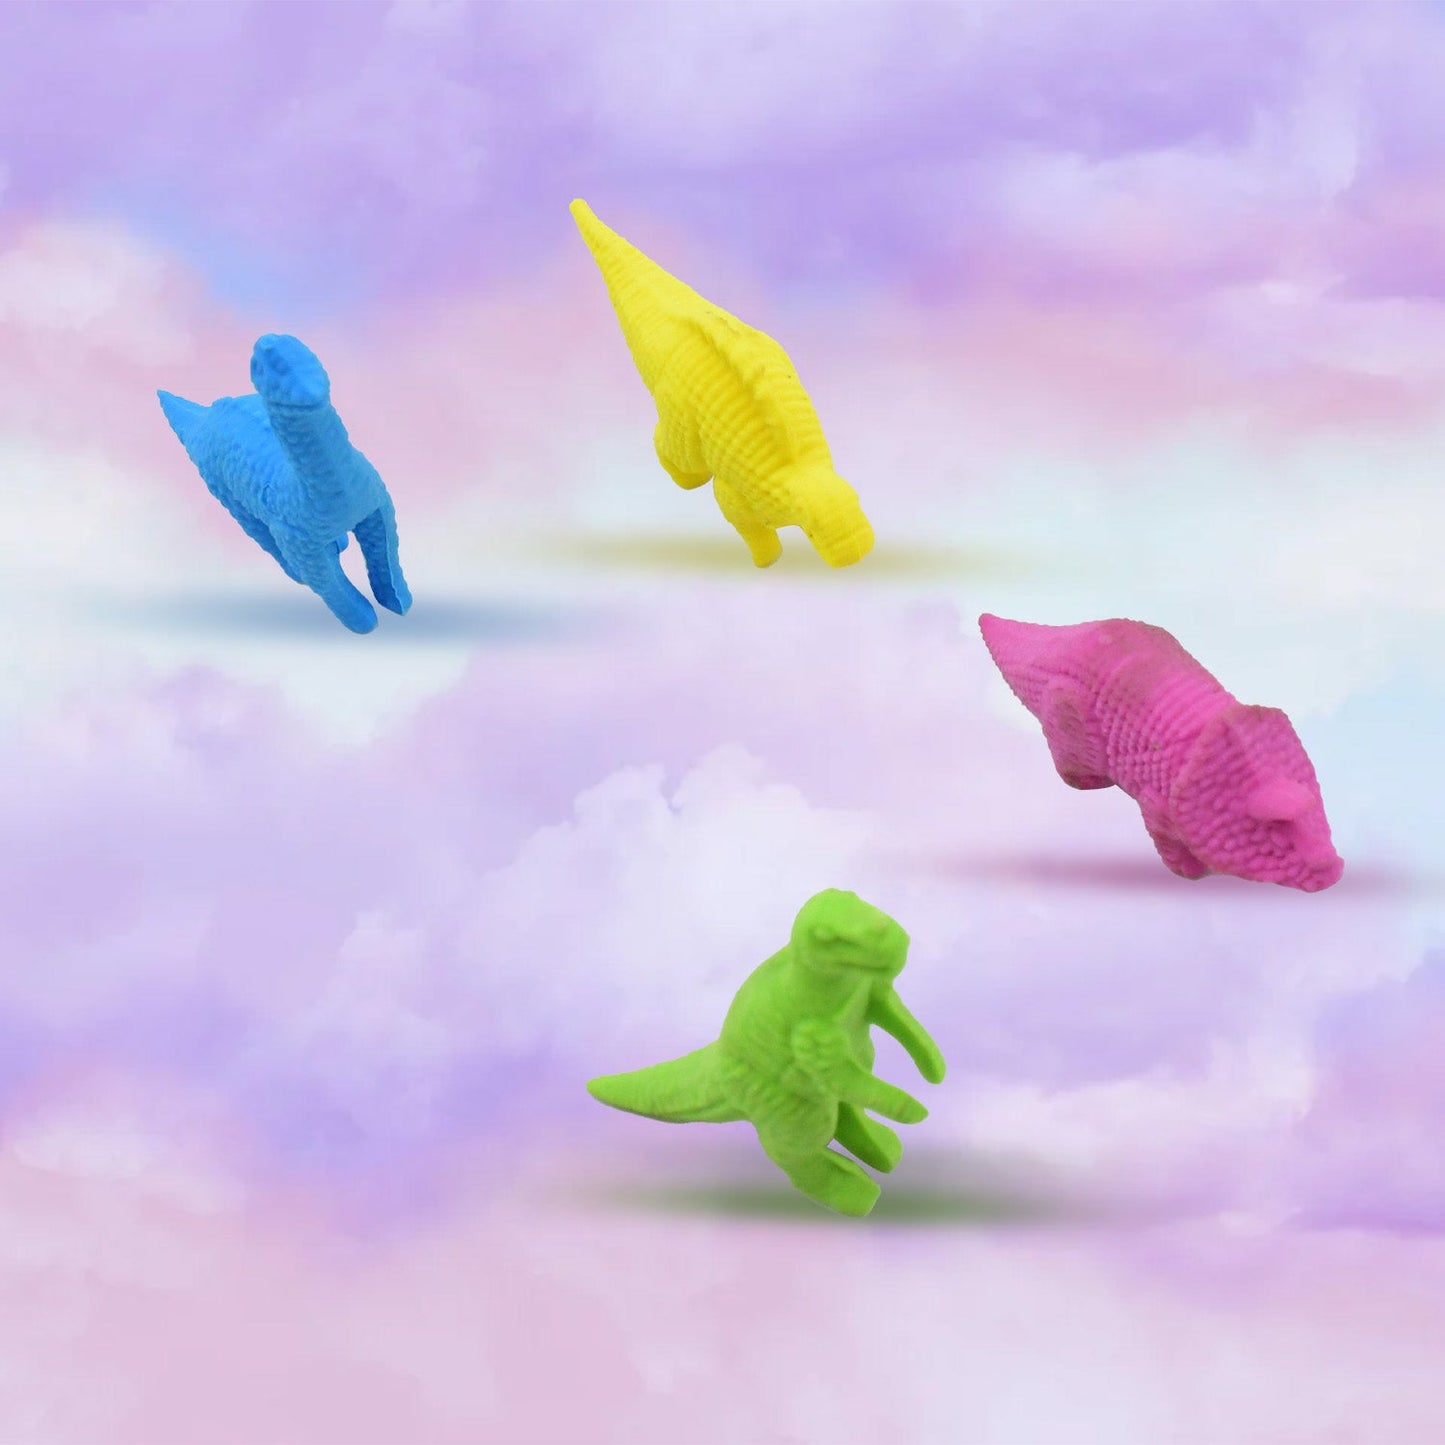 Small Dinosaur Shaped Erasers Animal Erasers for Kids, Dinosaur Erasers Puzzle 3D Eraser, Soft Non-Dust Stationery Activity Toy, for School Supplies (4 Pc Set)